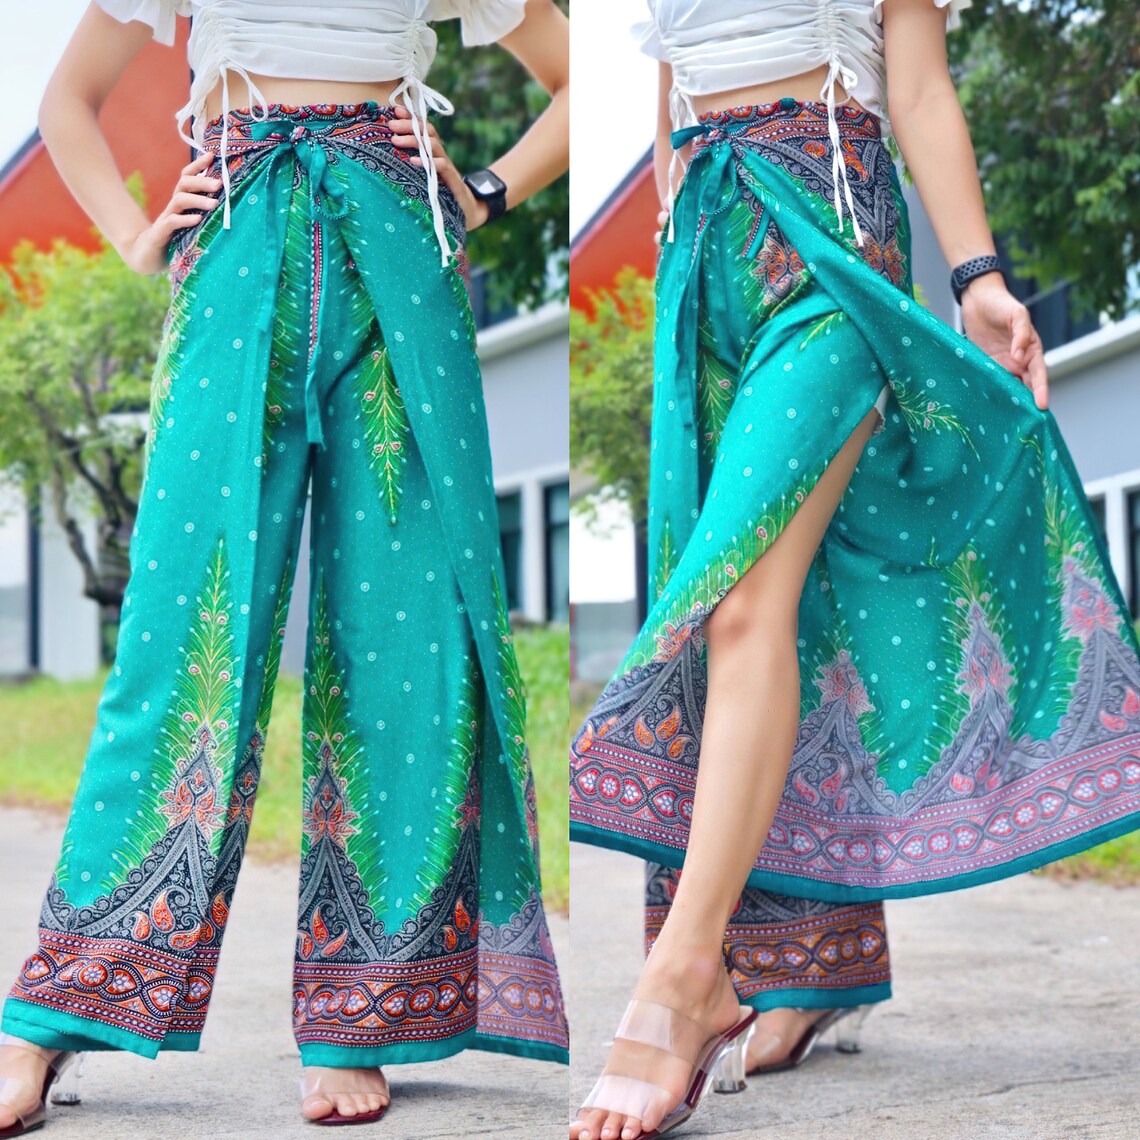 Eye-catching turquoise boho feather print wrap pants paired with a crisp white top, perfect for a fresh summer look.